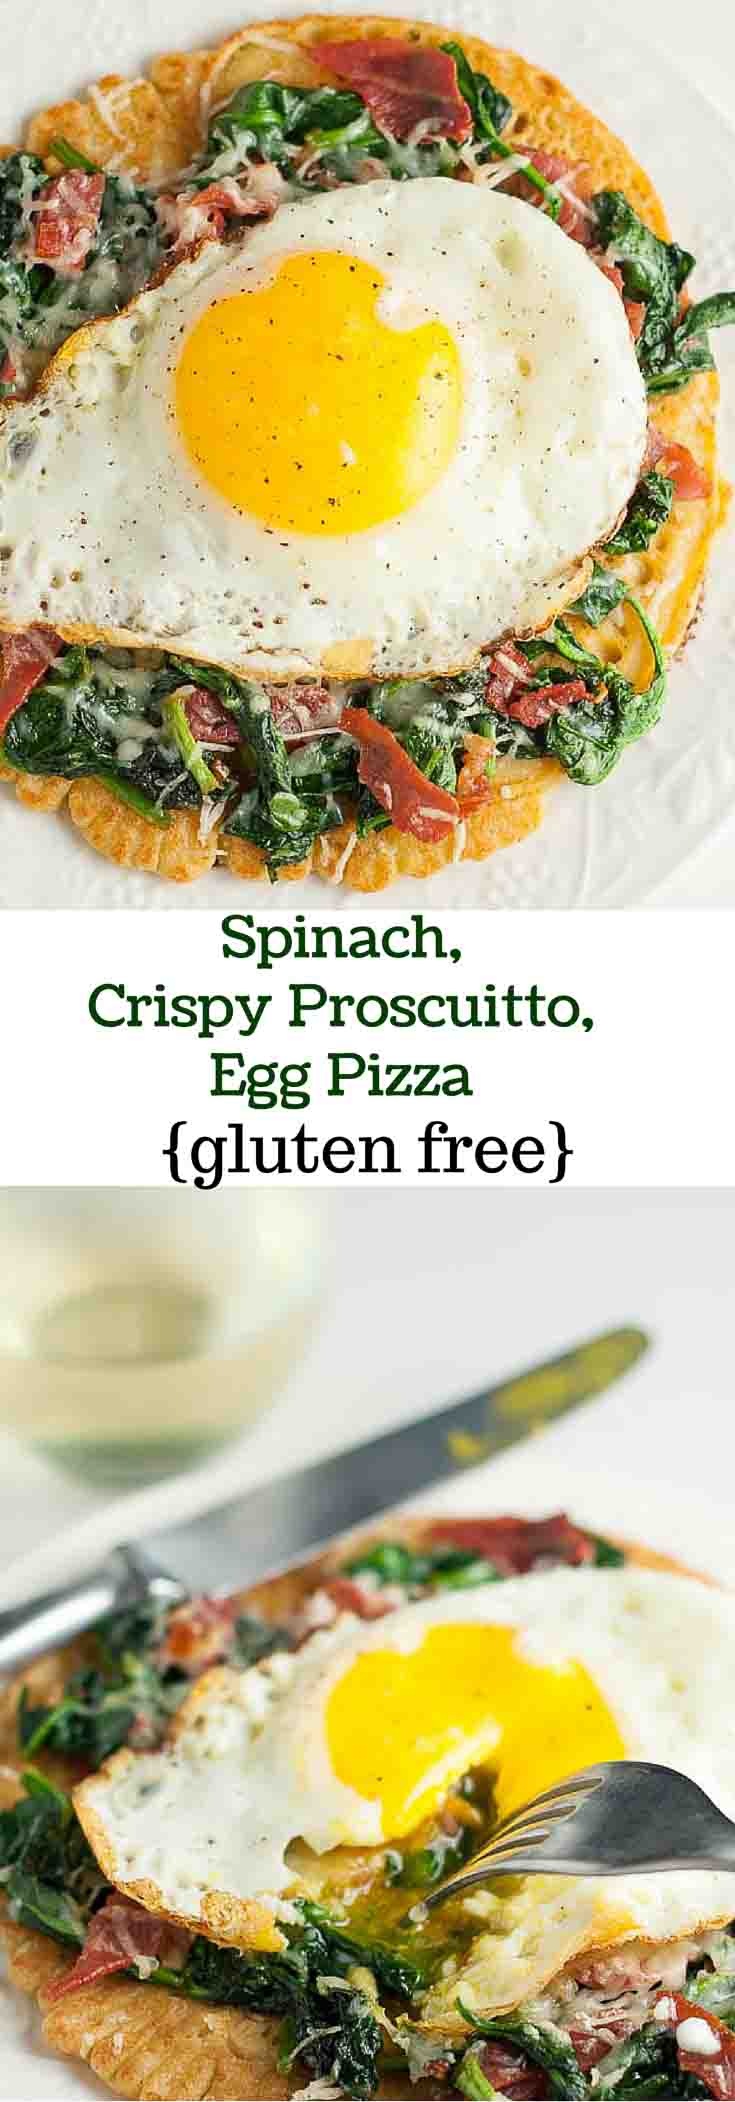 Spinach, Crispy Proscuitto, Egg Socca Pizza is a gluten free and healthy way to get your pizza fix. This quick, easy, and healthy recipe is perfect for a weeknight dinner. https://www.mamagourmand.com